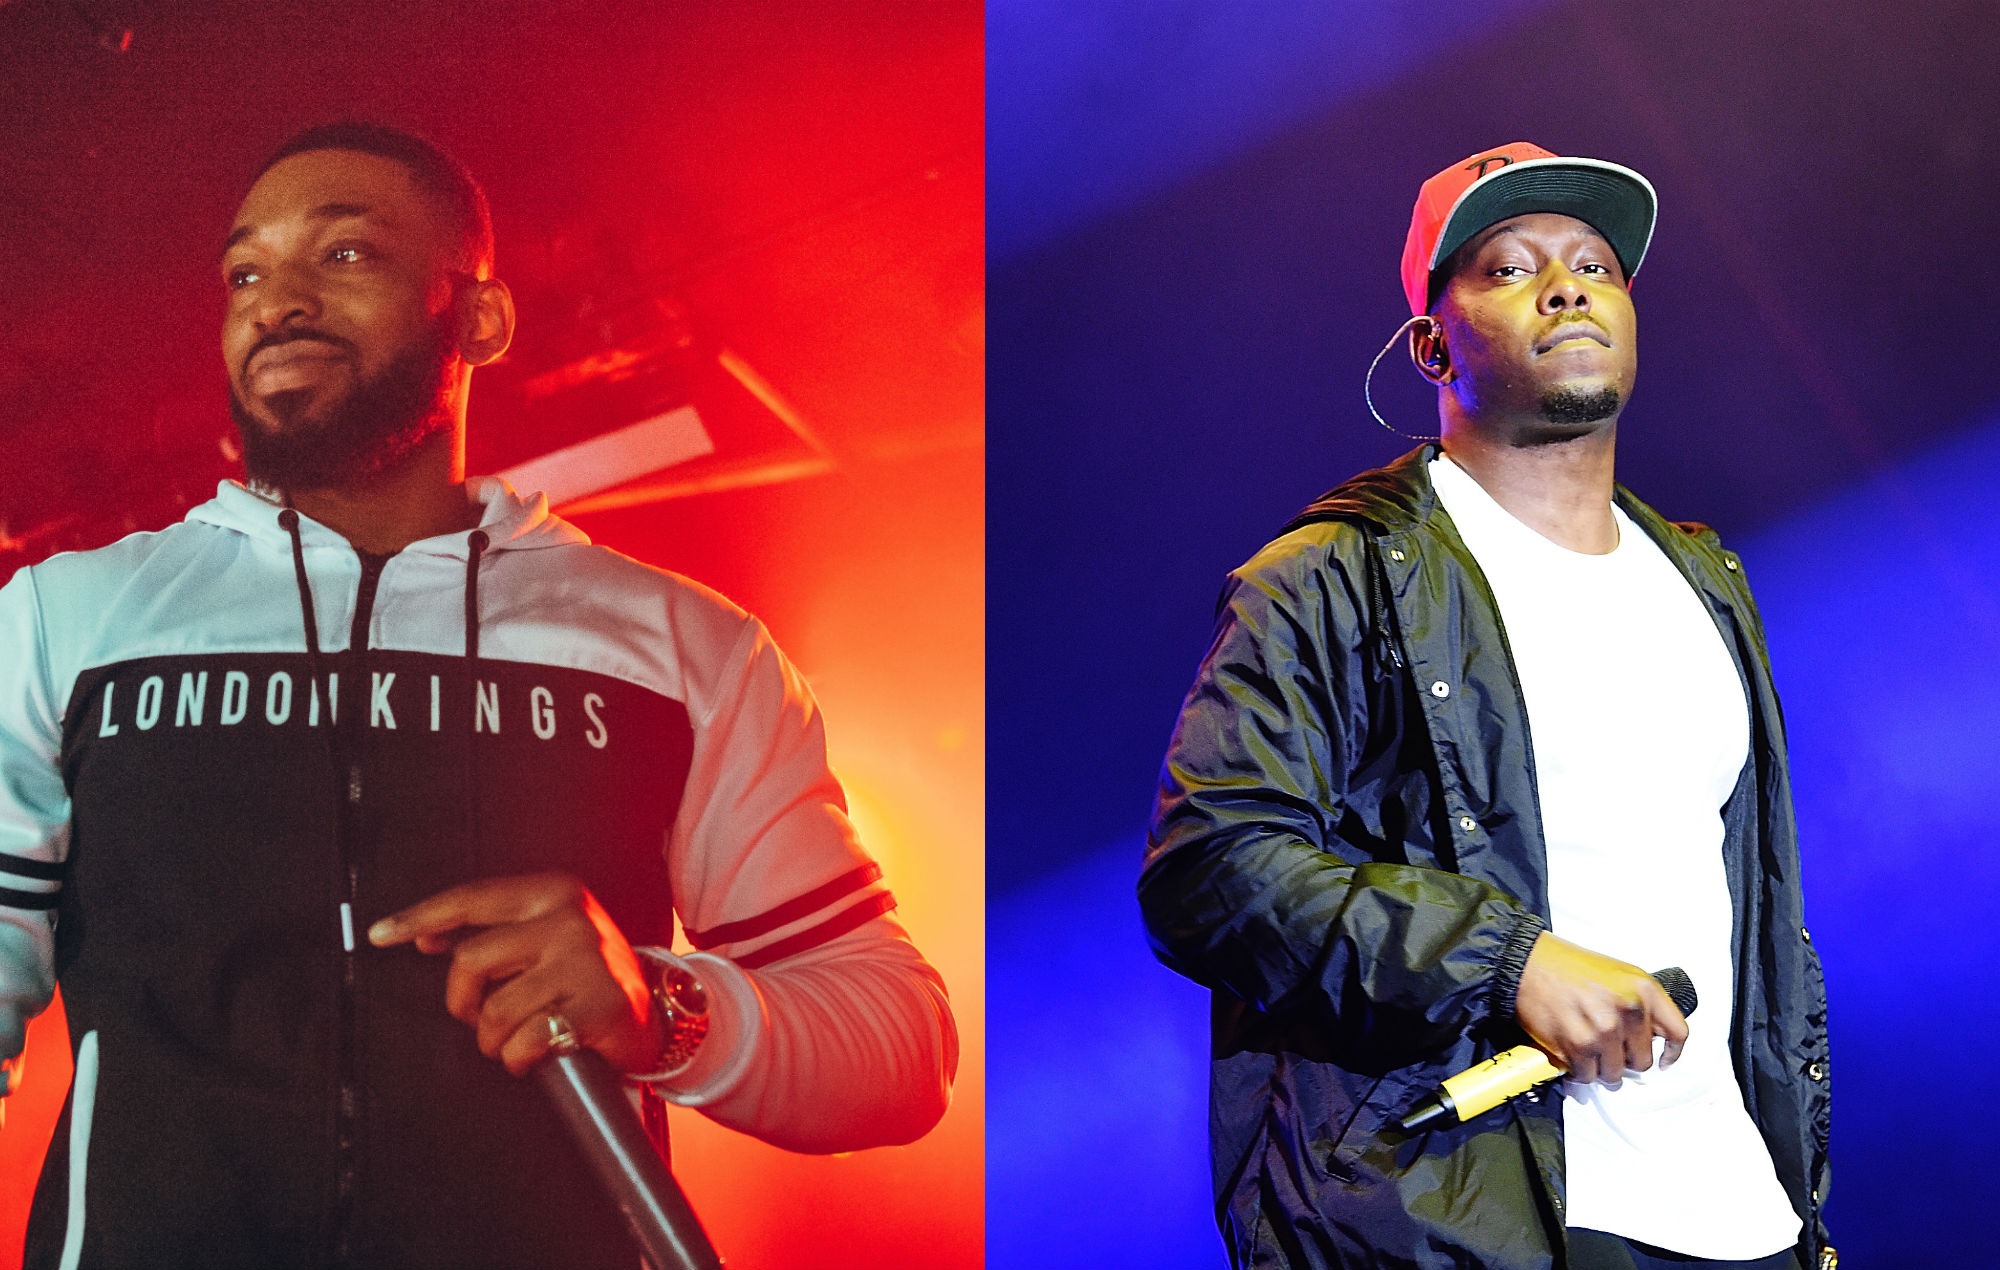 “Grime is music that broke the system”: Dizzee Rascal and Big Tobz on being pioneers of UK rap